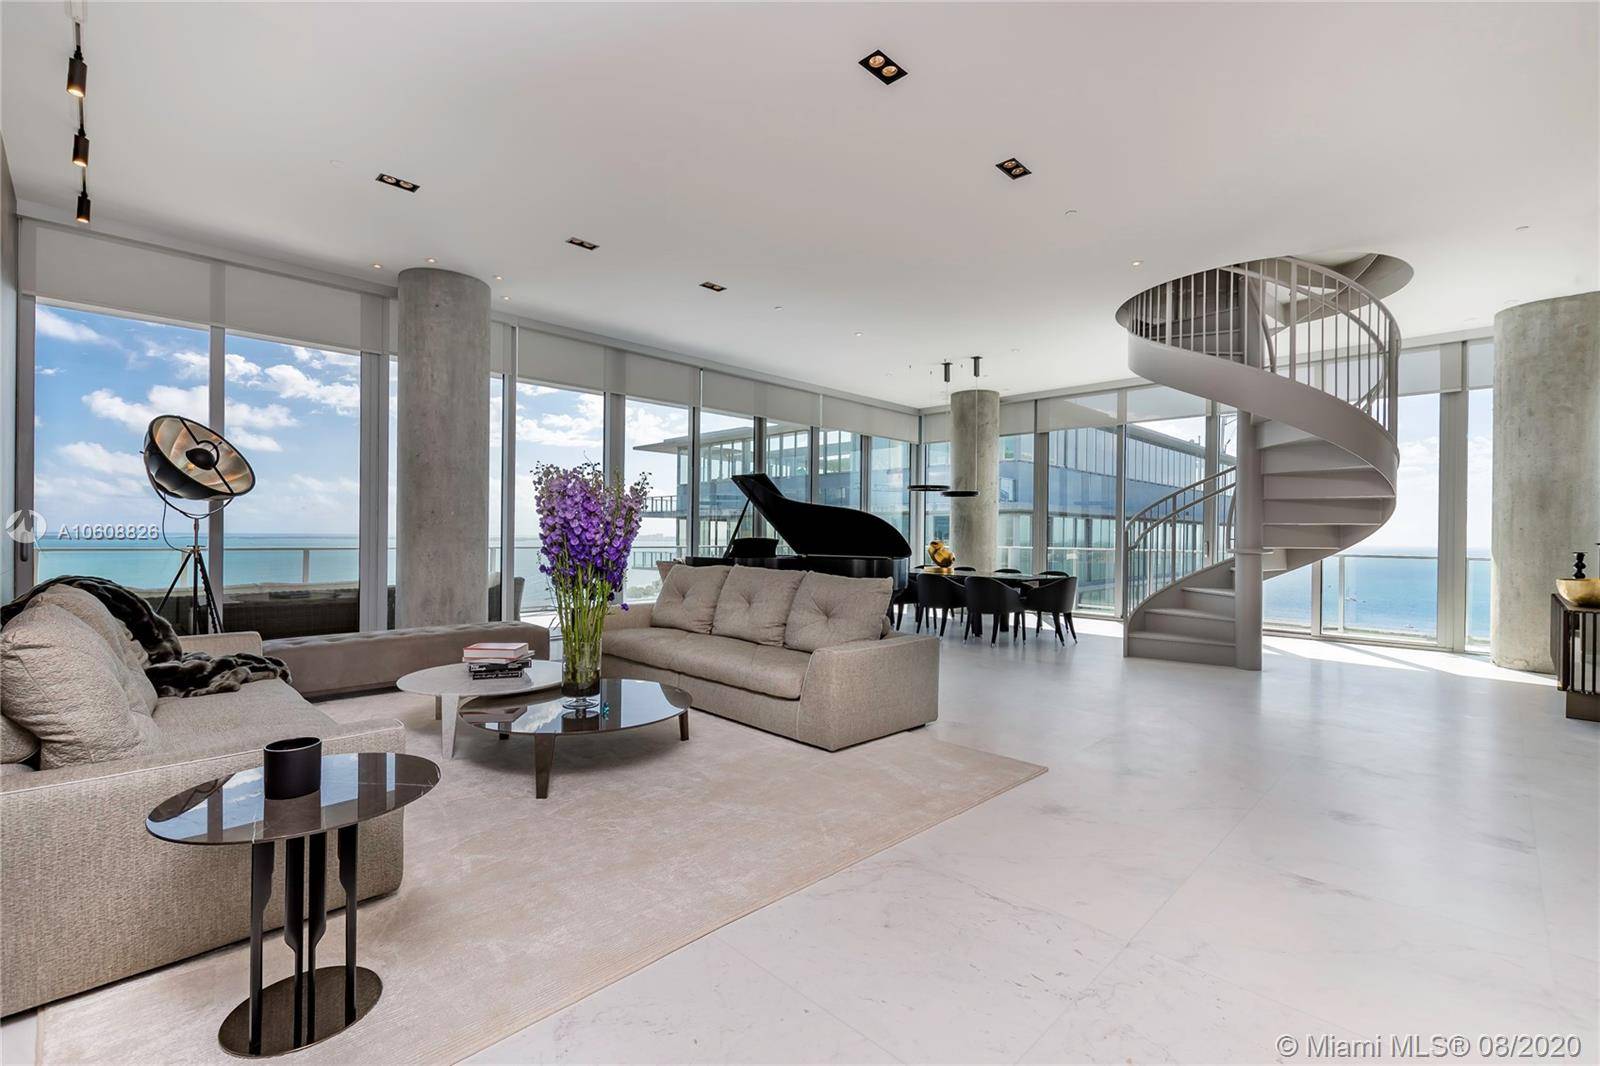 The Nicest Penthouse in Miami, at this distinct contemporary building with luxury amenities like 5 pools, spa, fitness center, club room, library, residents lounge, children area, pet area, full time ...